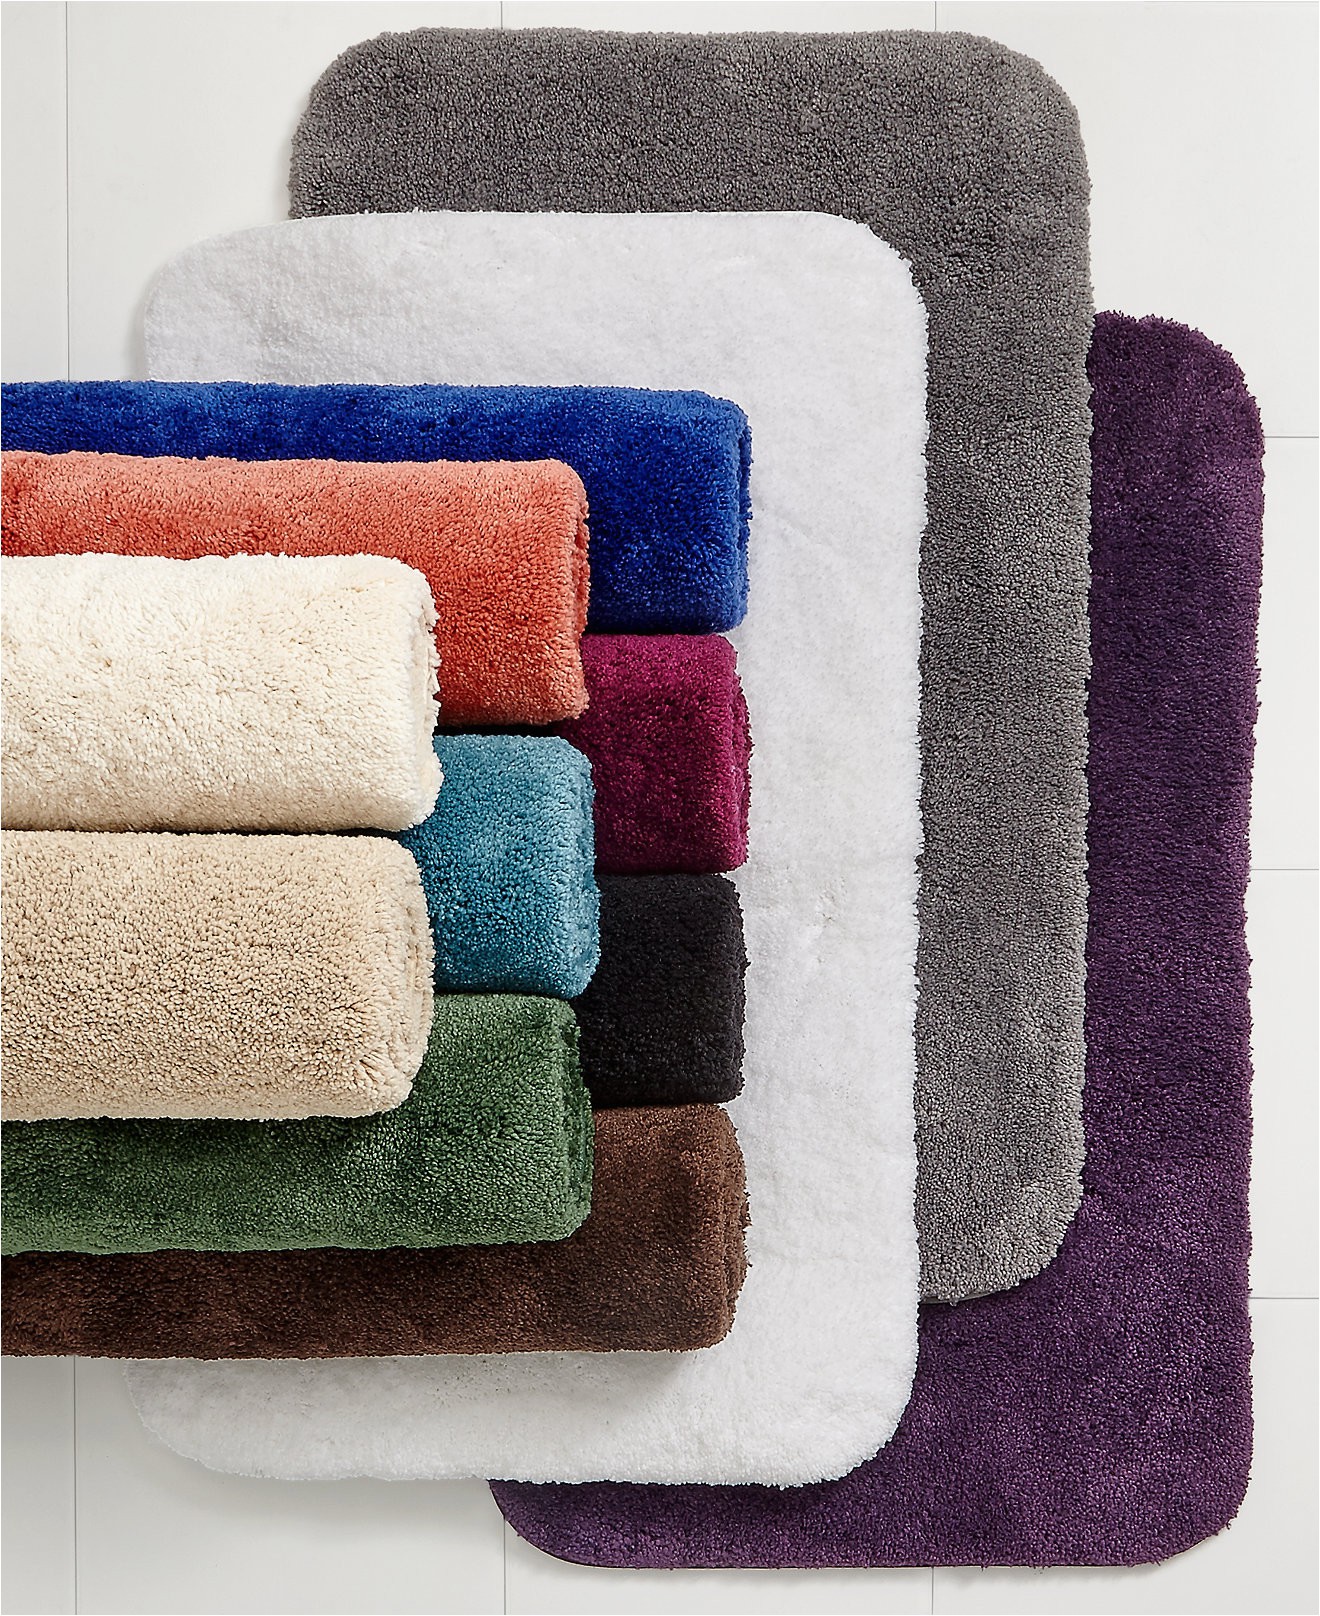 Jcpenney Bath Mats and Rugs Jcpenney Bathroom Rugs and towels Image Of Bathroom and Closet